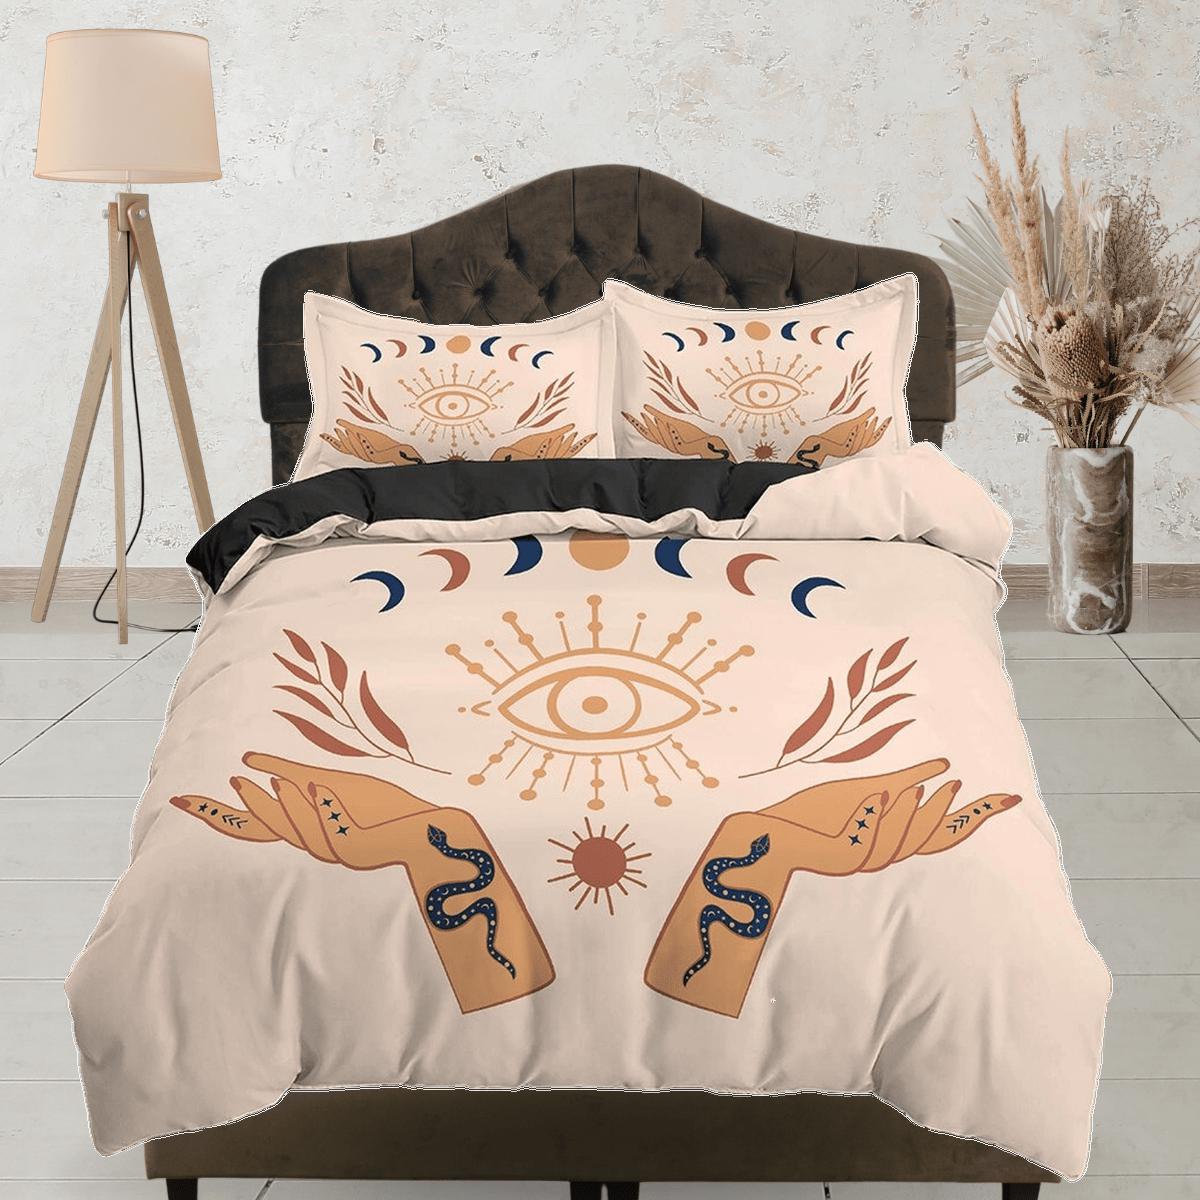 daintyduvet Beige Boho Bedding with Wiccan Design, Witchy Duvet Cover Set, Dorm Bedding, Tarot Psychic Aesthetic Duvet Cover King Queen Full Twin Single